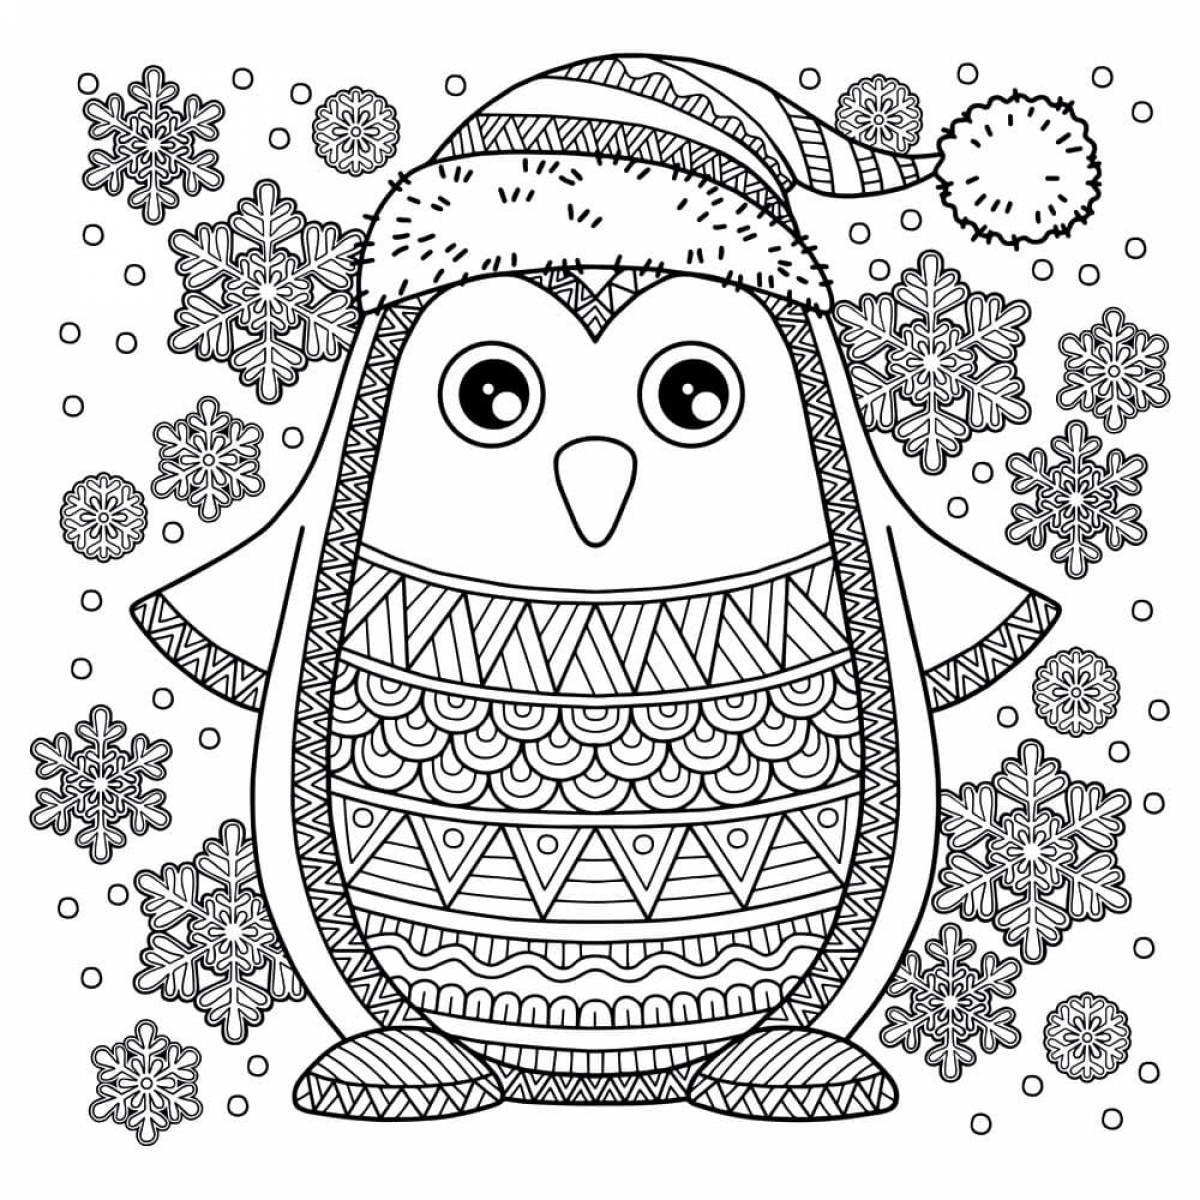 Winter anti-stress coloring book for children